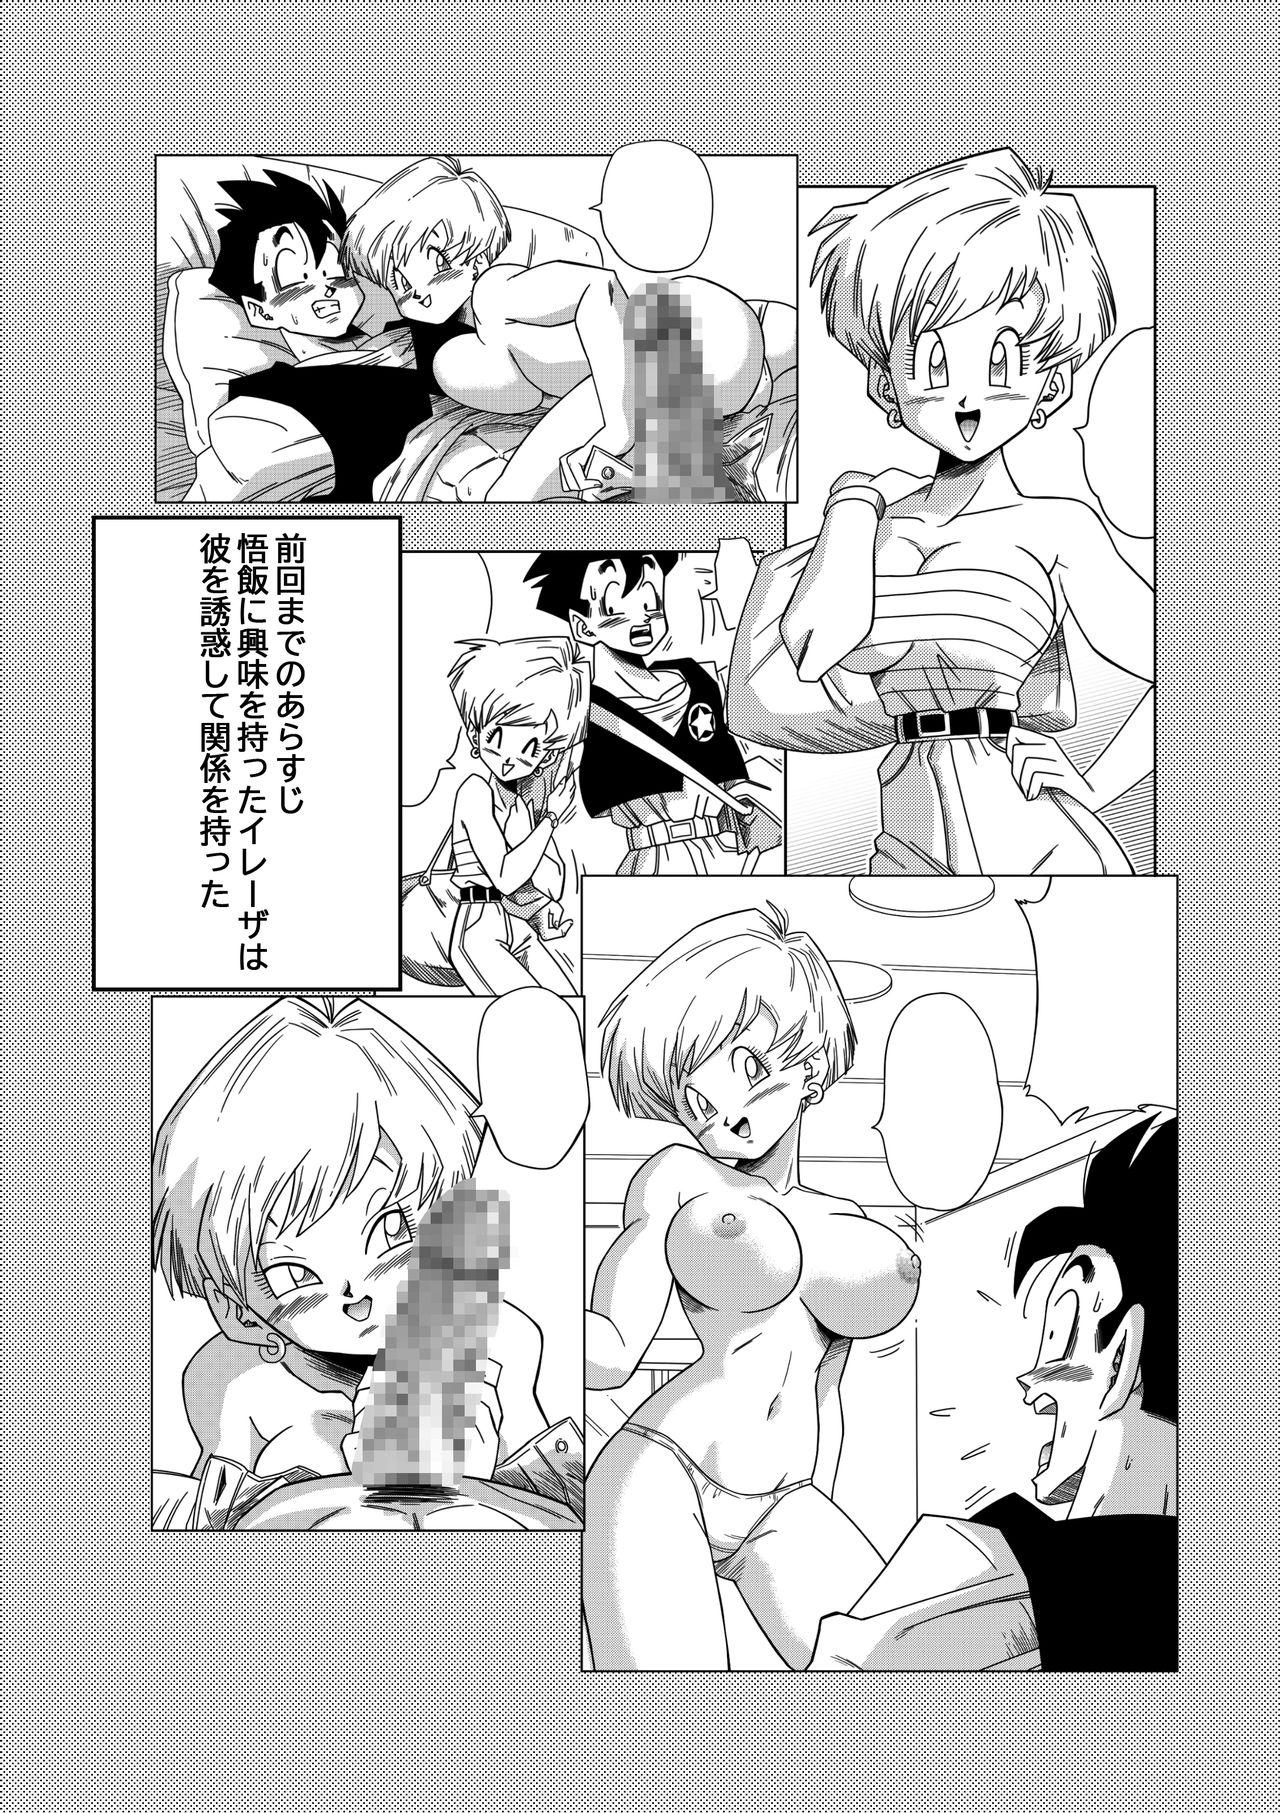 Sesso LOVE TRIANGLE Z PART 4 - Dragon ball z Sucking Dicks - Page 2